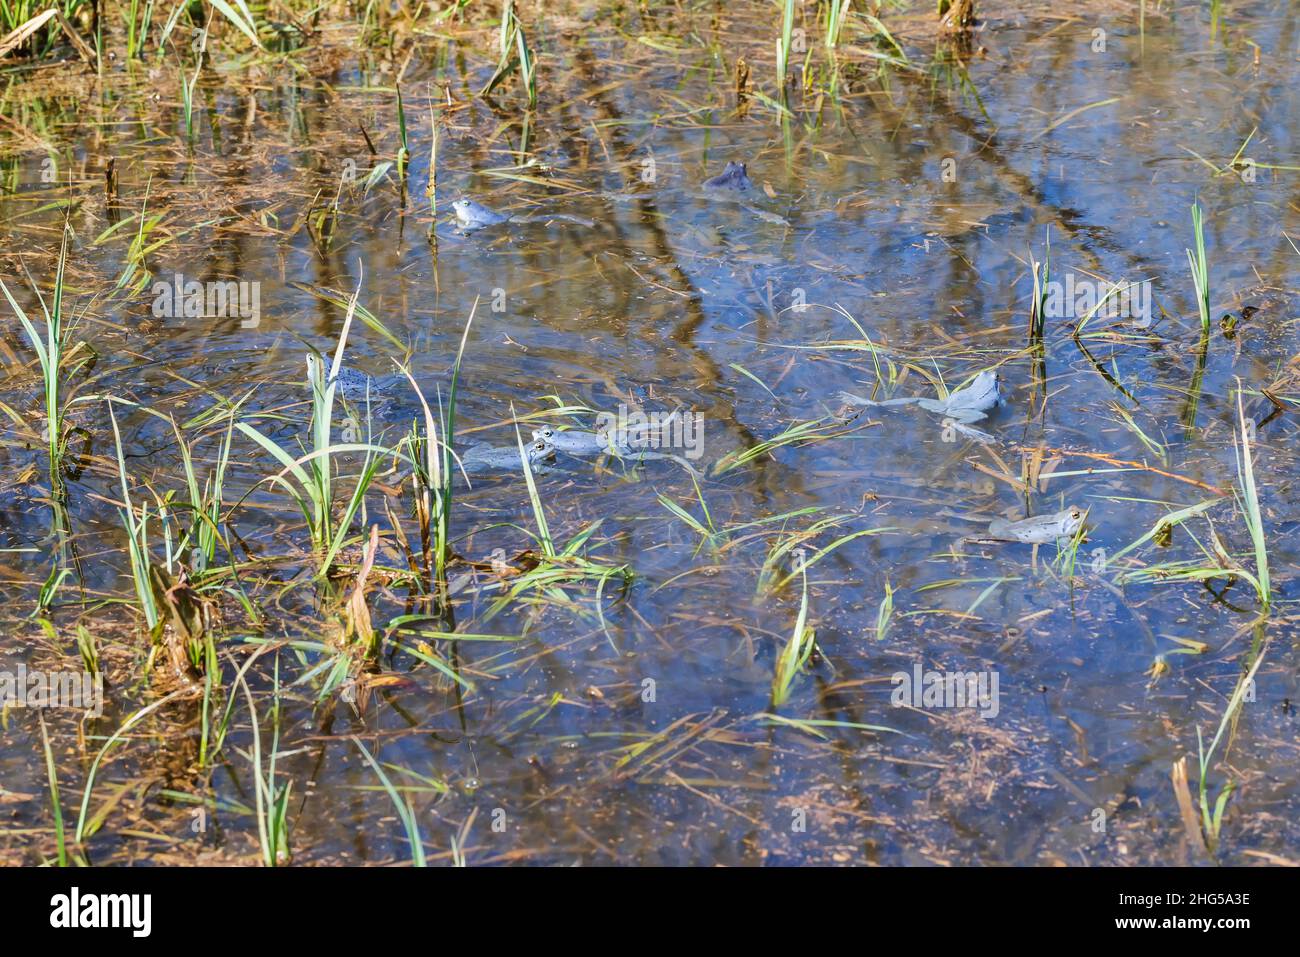 Blue Frog - Frog Arvalis on the surface of a swamp. Photo of wild nature Stock Photo